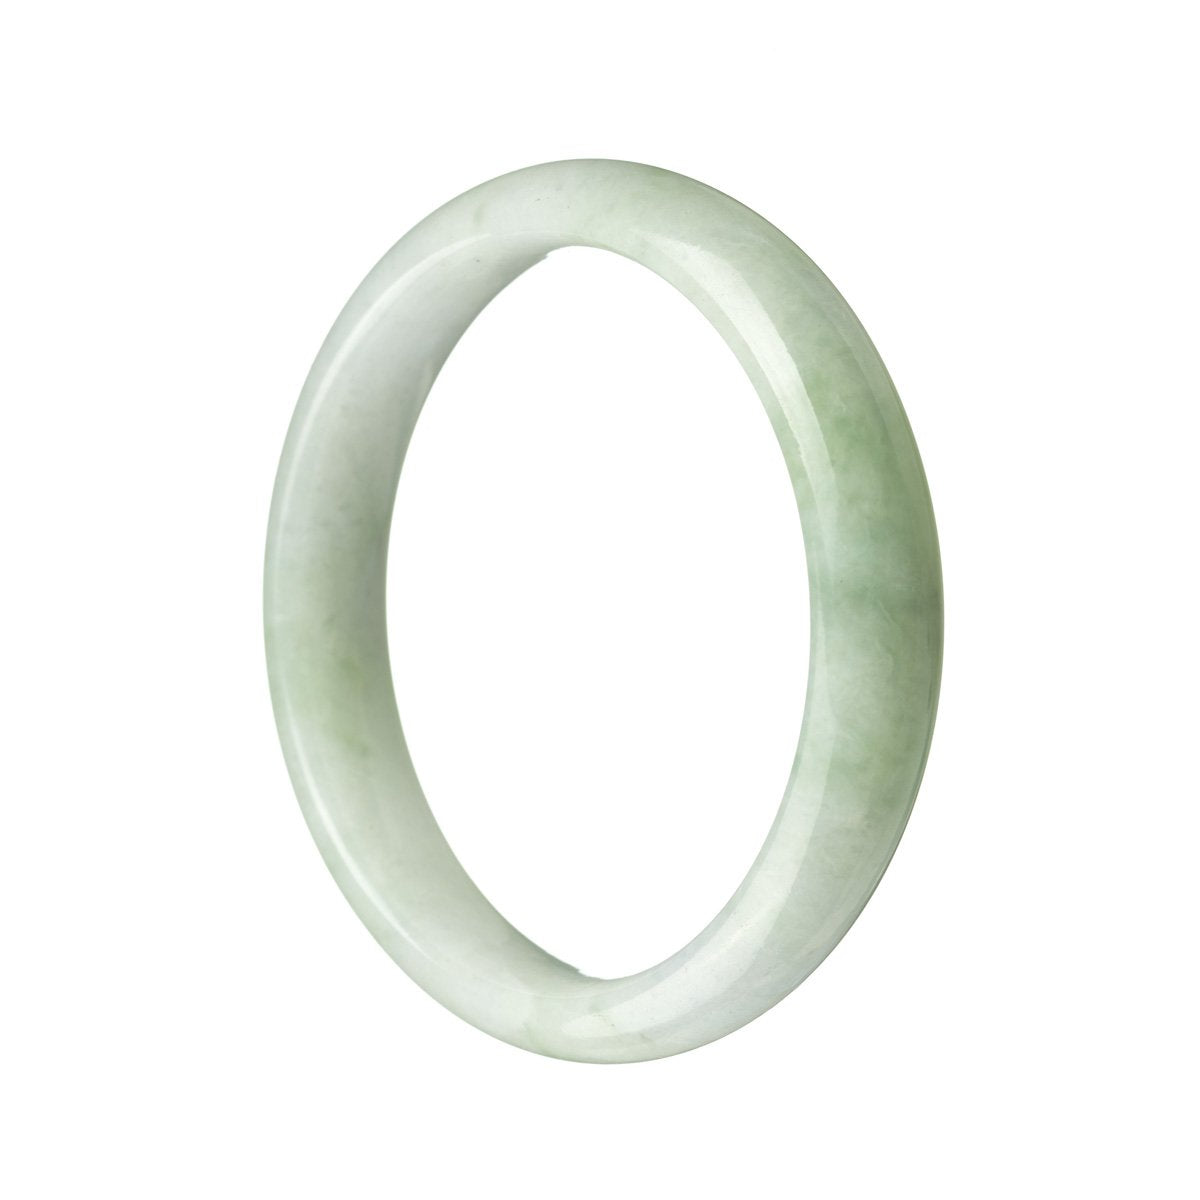 A stunning pale green lavender traditional jade bracelet in a half moon shape, measuring 57mm. Exquisite craftsmanship by MAYS GEMS.